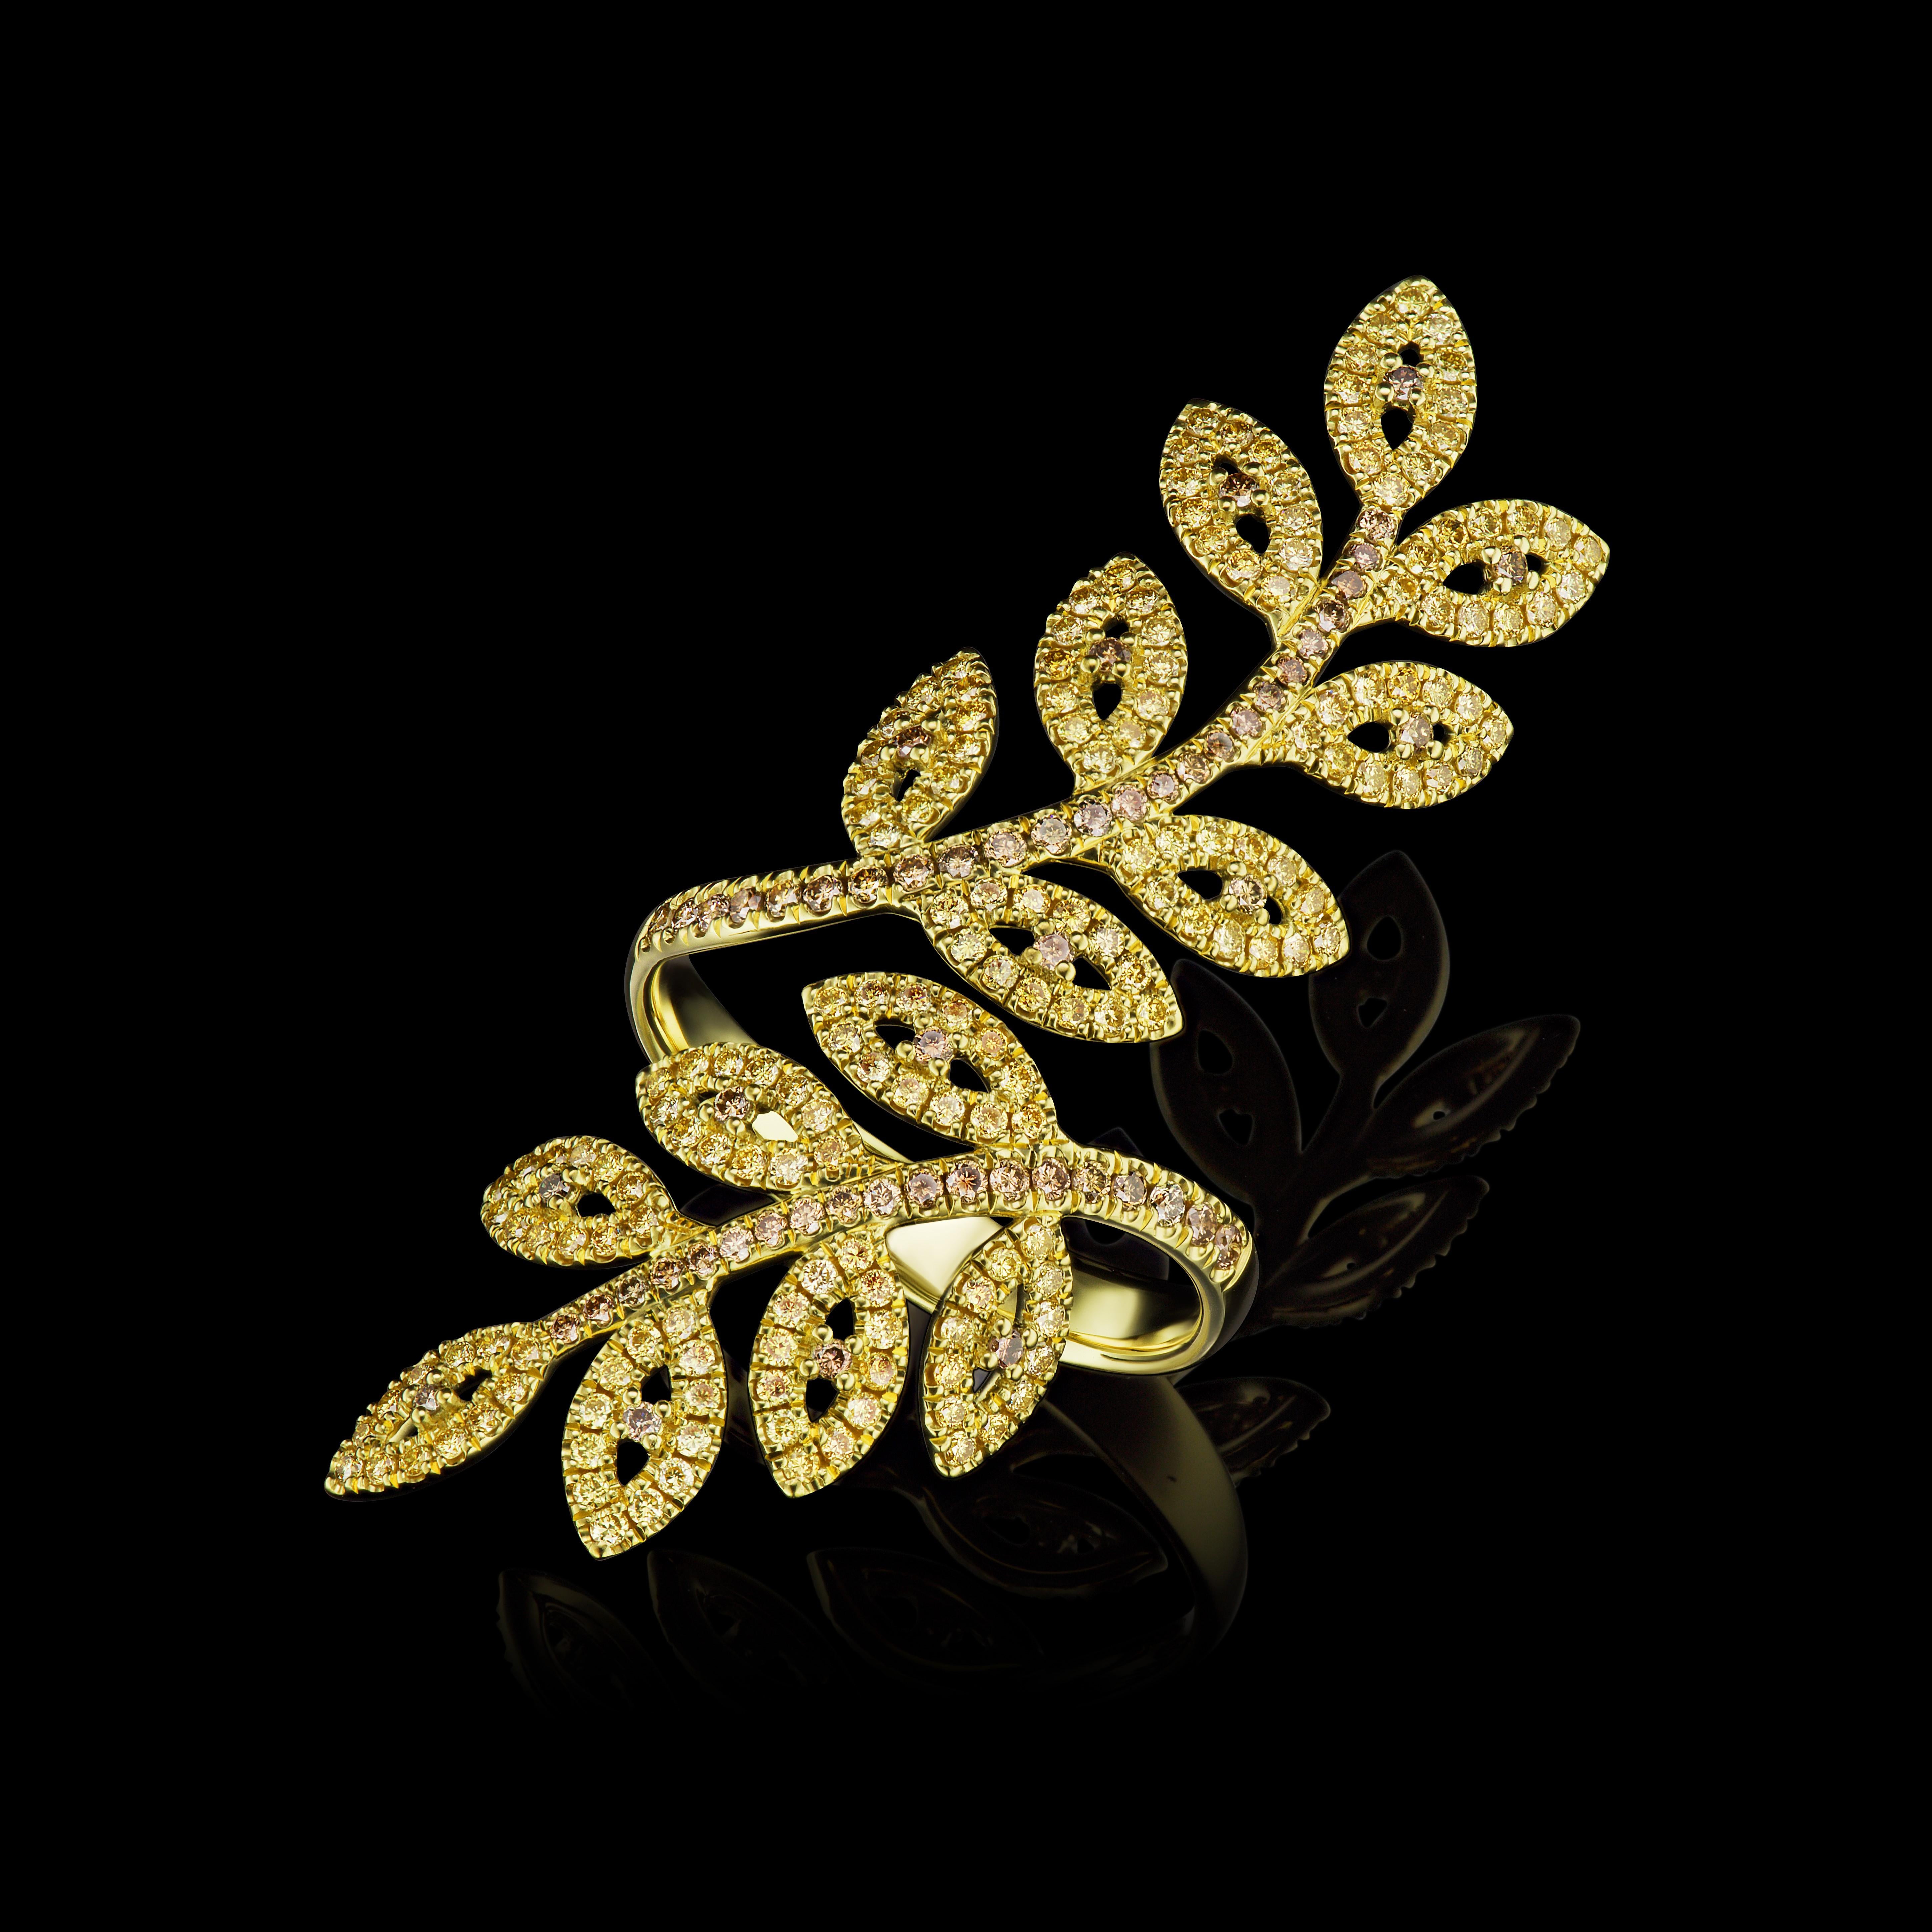 This gorgeous Leaf Ring design is comprised 238 Yellow Diamonds and has a total weight of 1.65 carats all set in 18K yellow Gold! 

